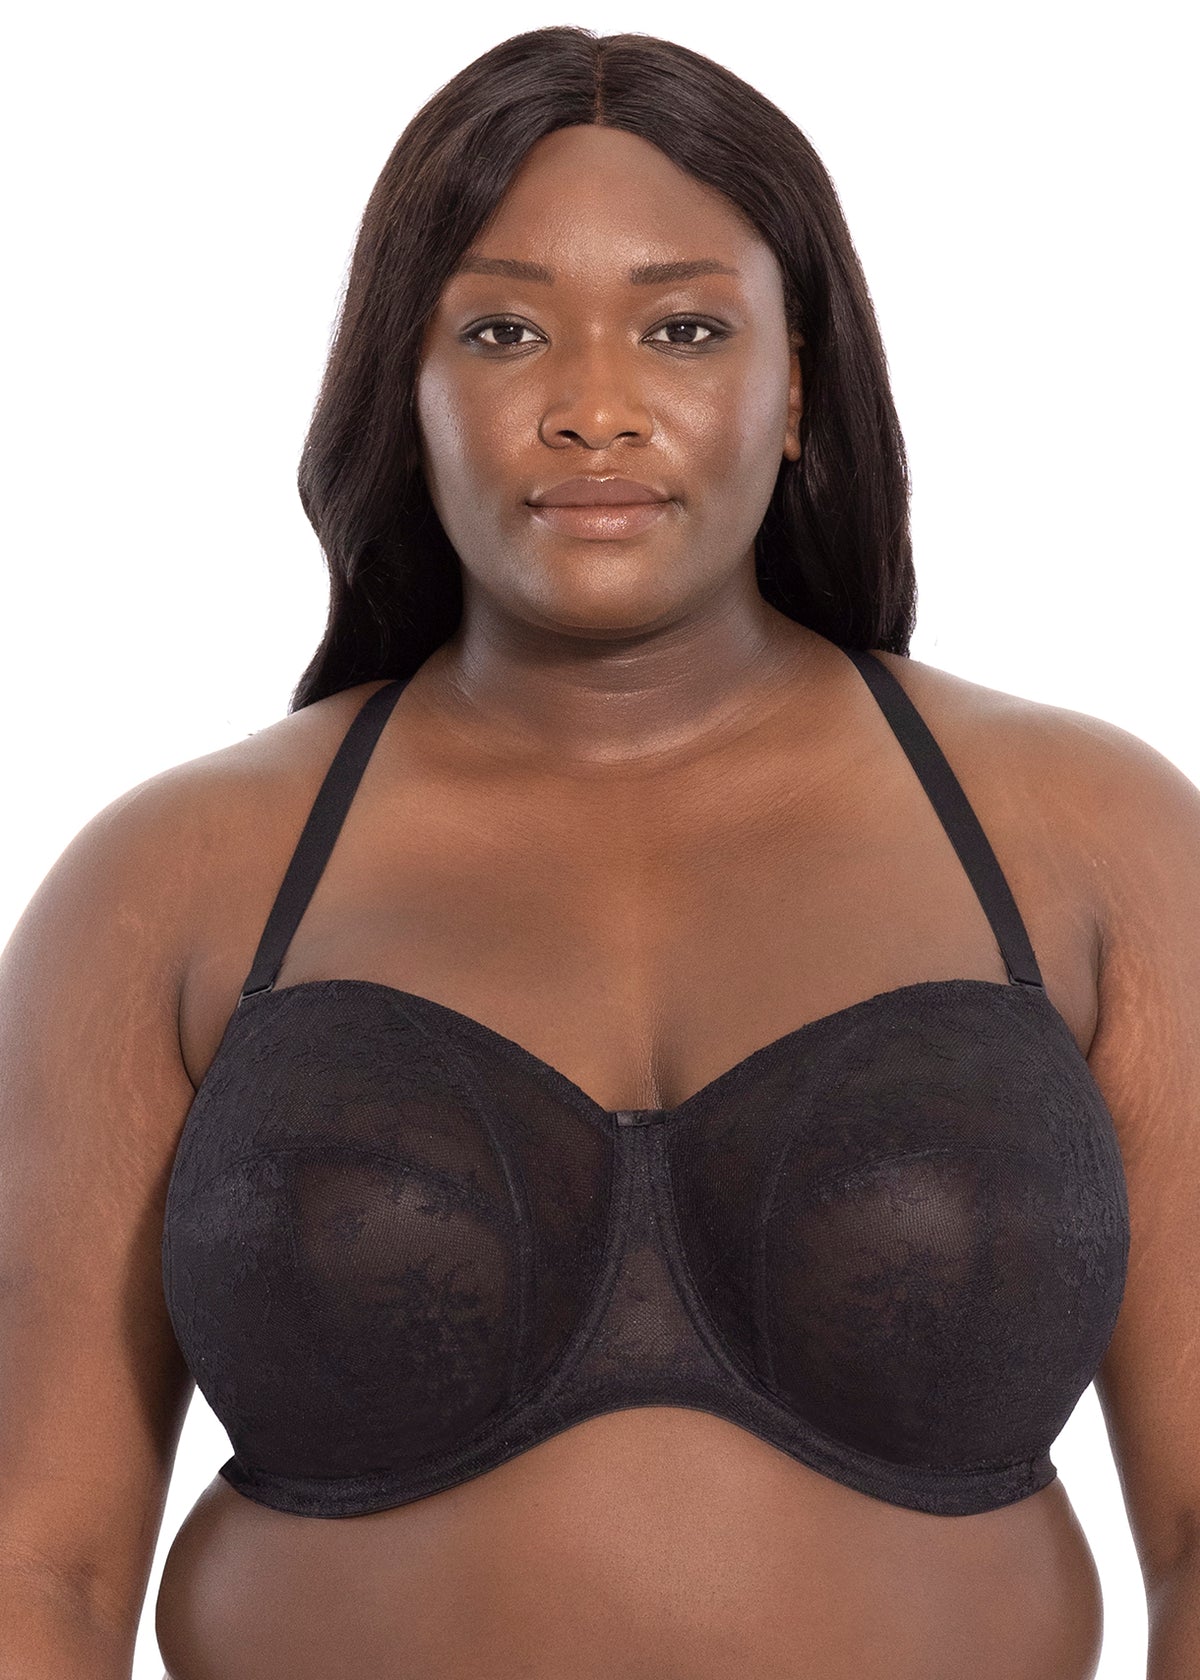 Breakout Bras - Warmer weather is just around the corner! Try out the  Verity strapless bra by Goddess with your spring outfits! Available in nude  and black! . . . . #breakoutbras #